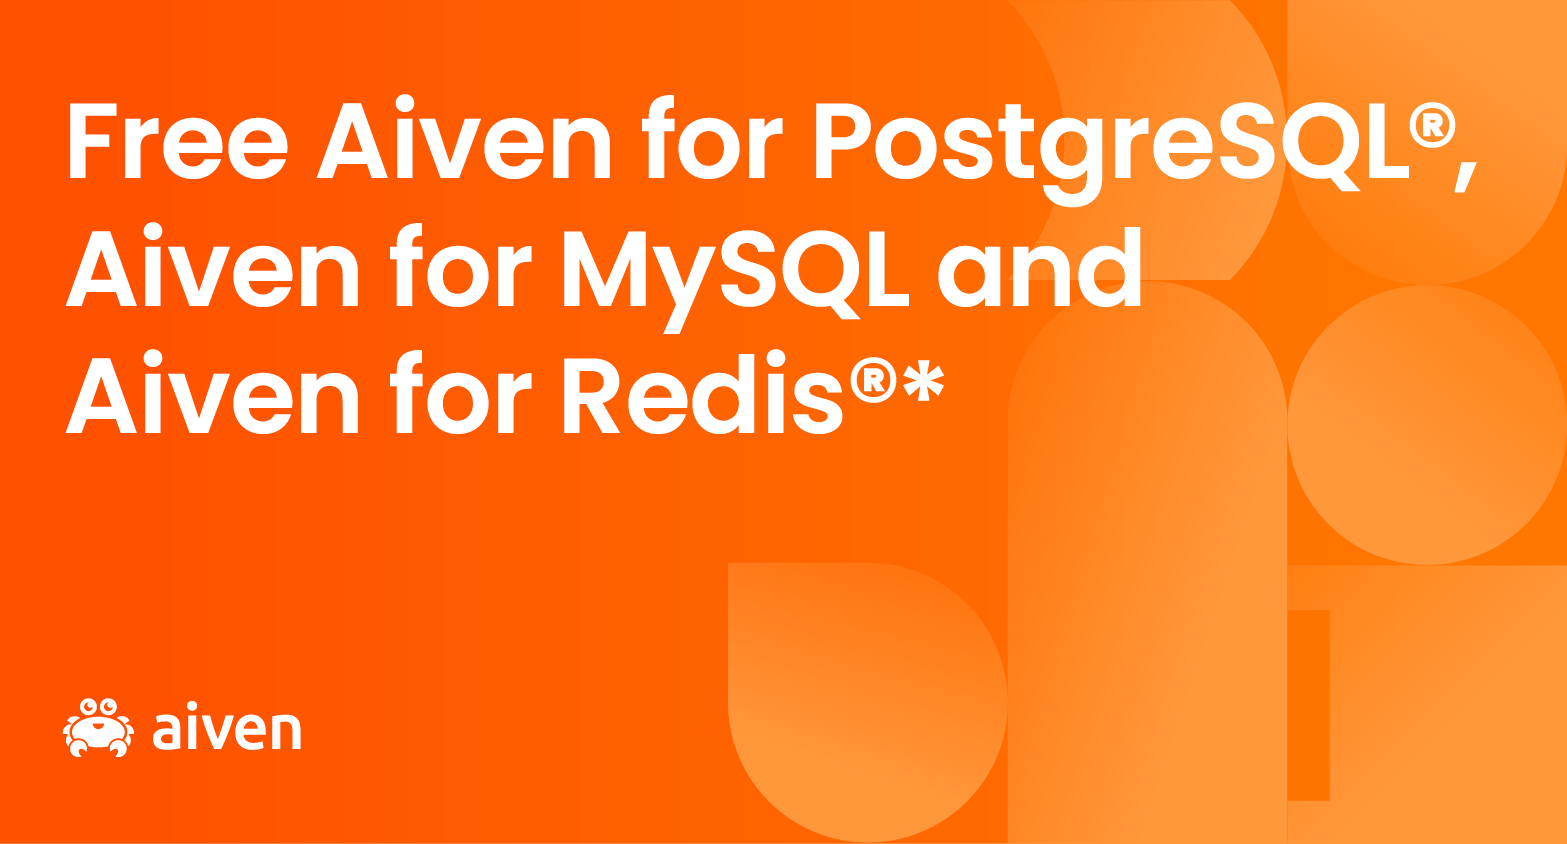 Get started with free databases for PostgreSQL, MySQL, and Redis. 